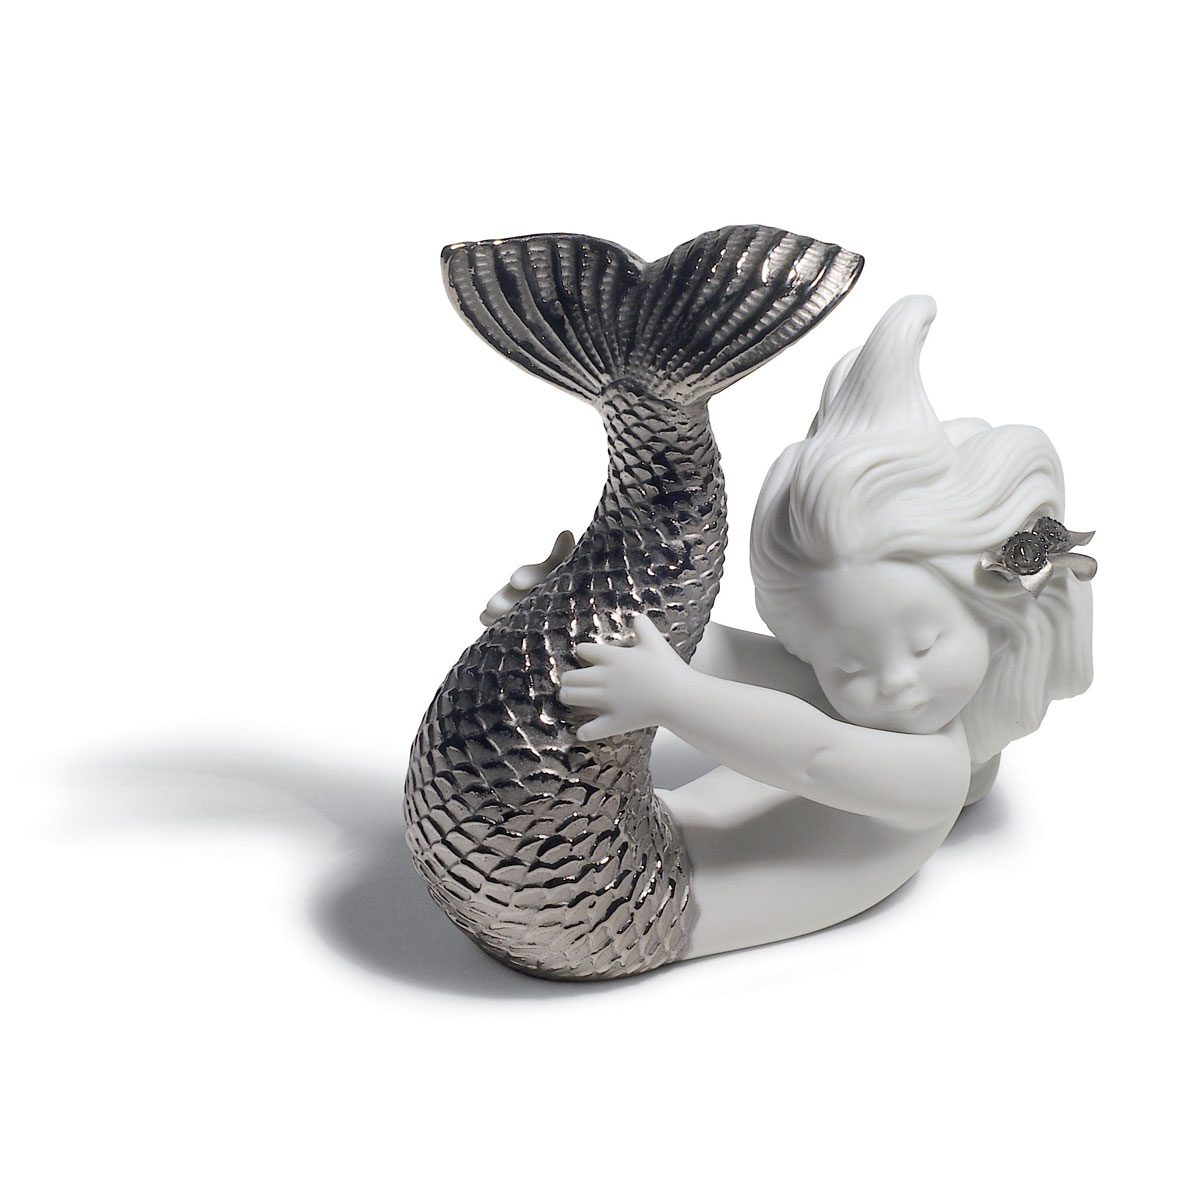 Lladro Classic Sculpture, Playing At Sea Mermaid Figurine. Silver Lustre